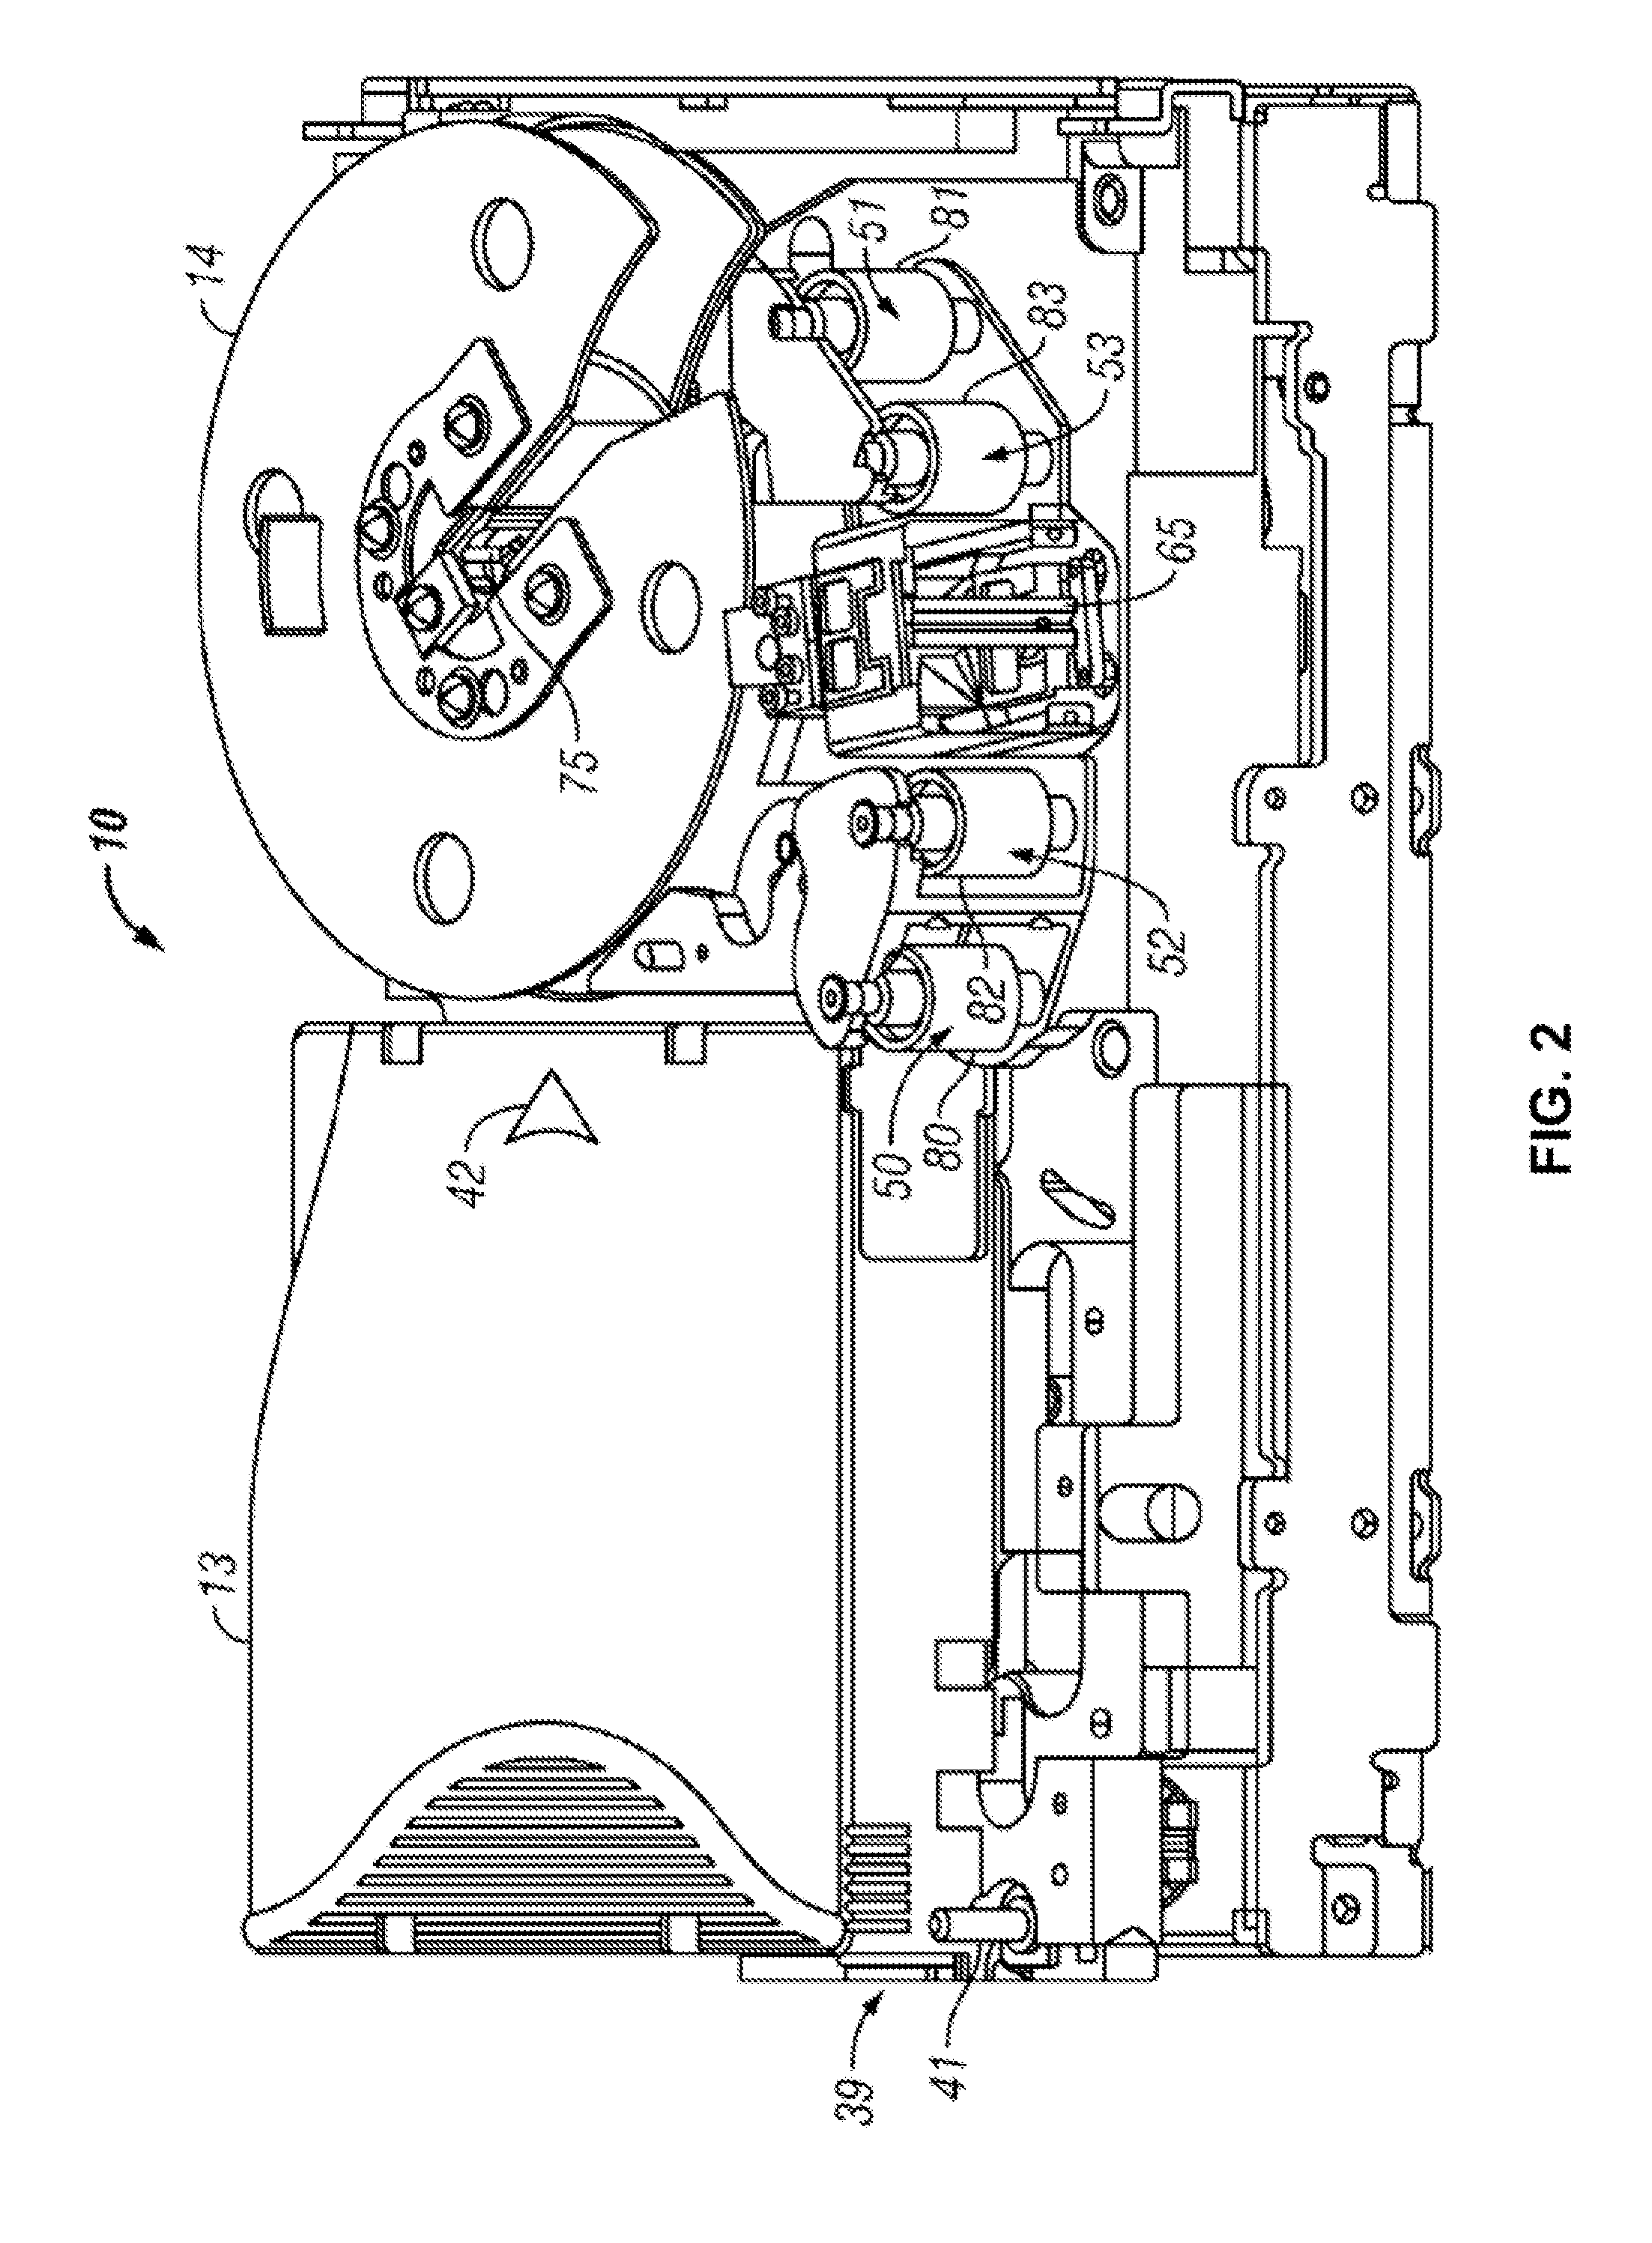 System, method, and computer program product for fast recovery to a write state